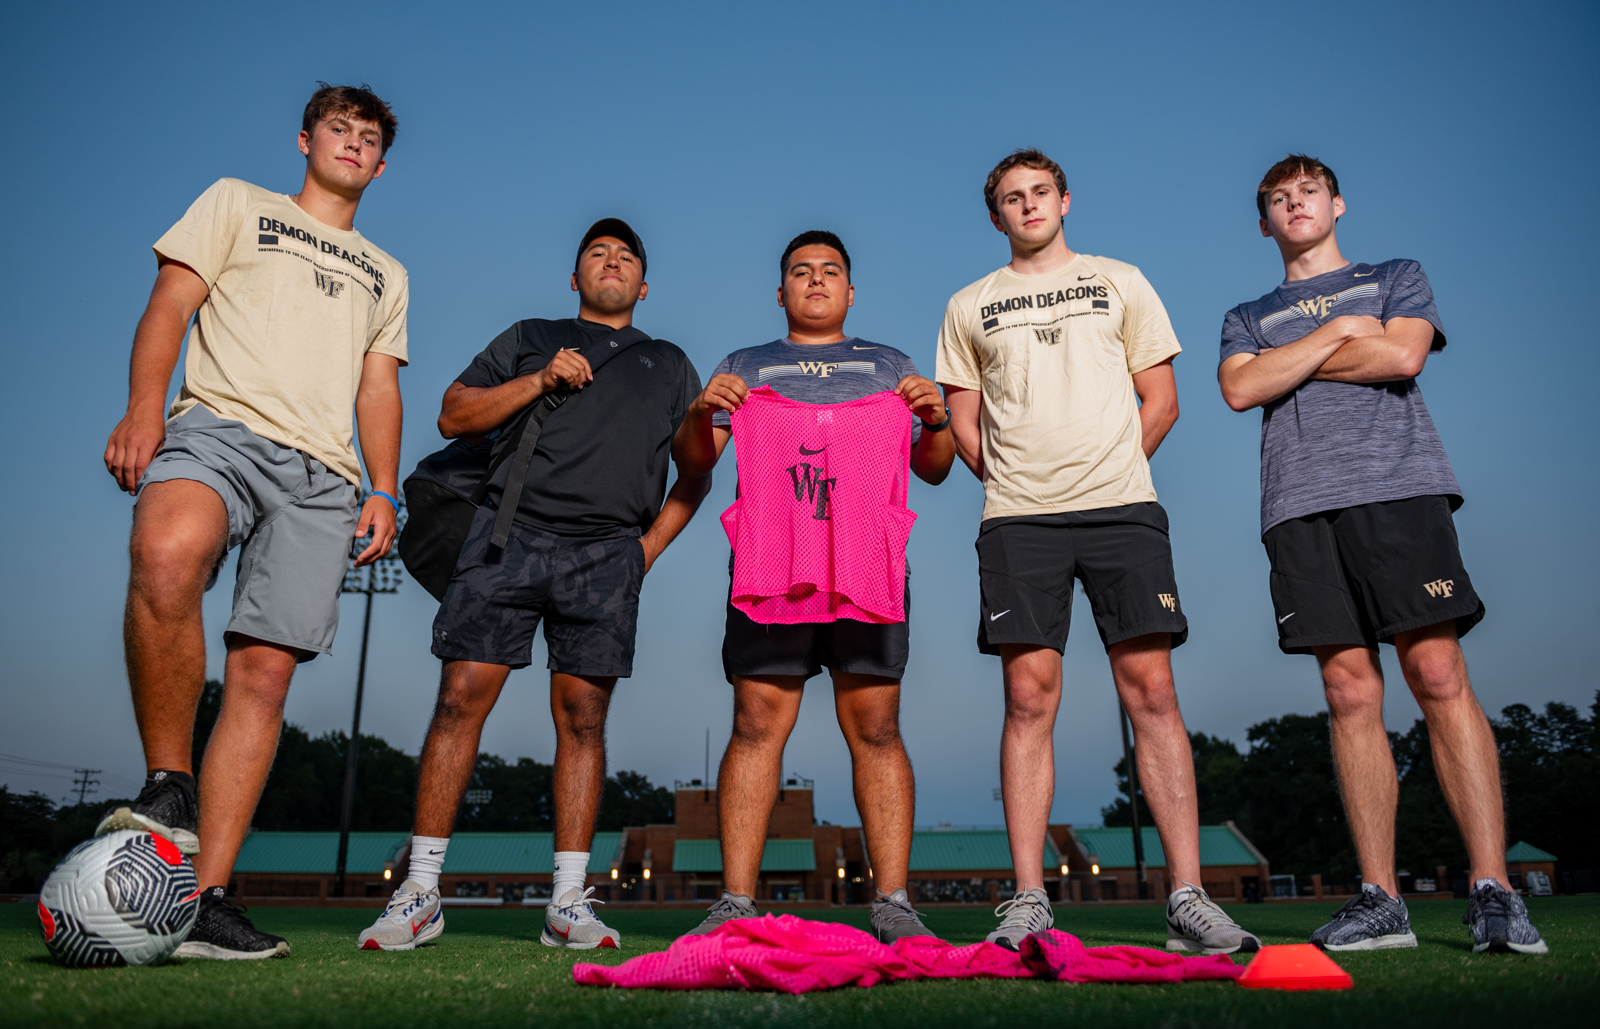 From left to right: Tyler Thompson, Nico Machado, Manny Guevara, Tyler Fausnaught, Ethan Humphrey, pose on Spry Practice Field after working and wrapping an evening practice. With three seasons of experience, Guevara leads the group as head manager.